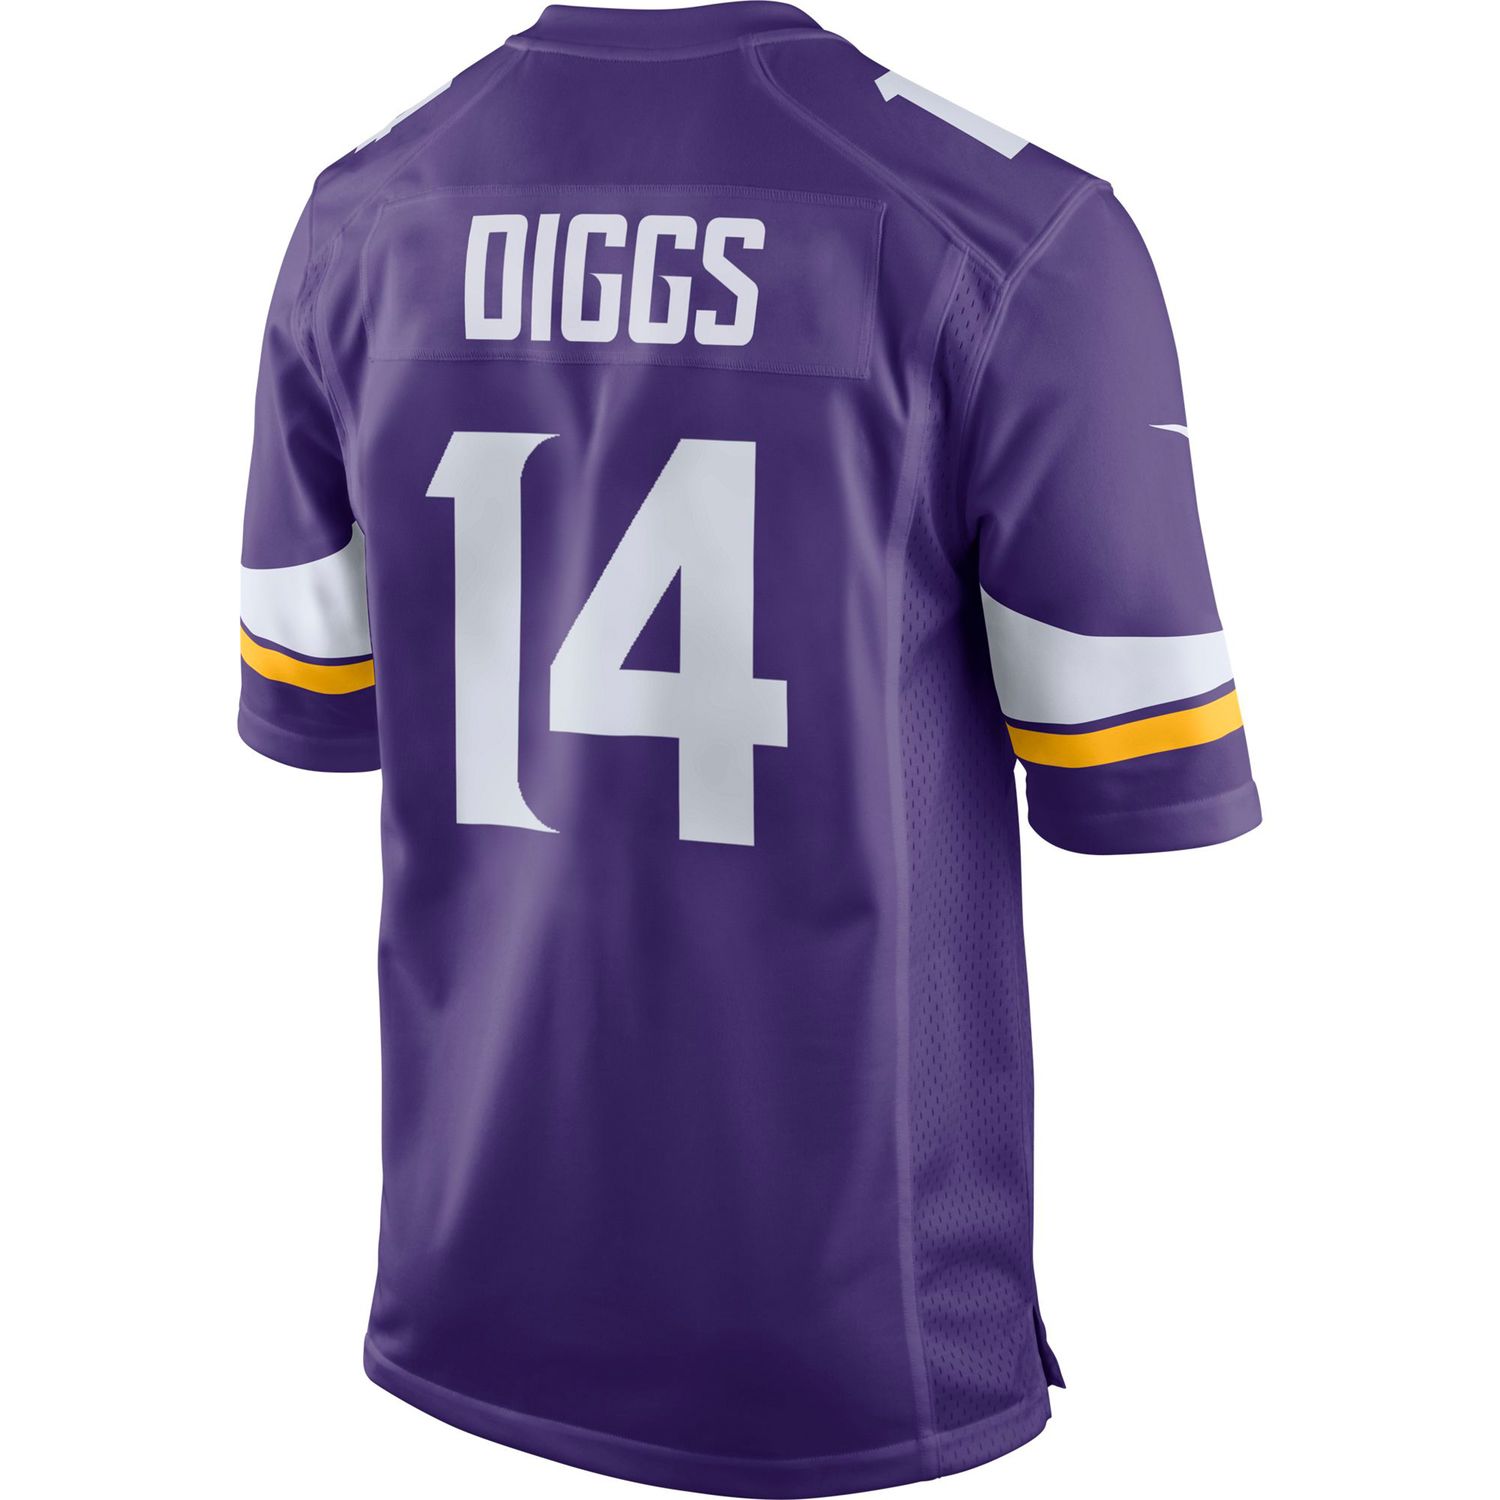 stefon diggs white jersey